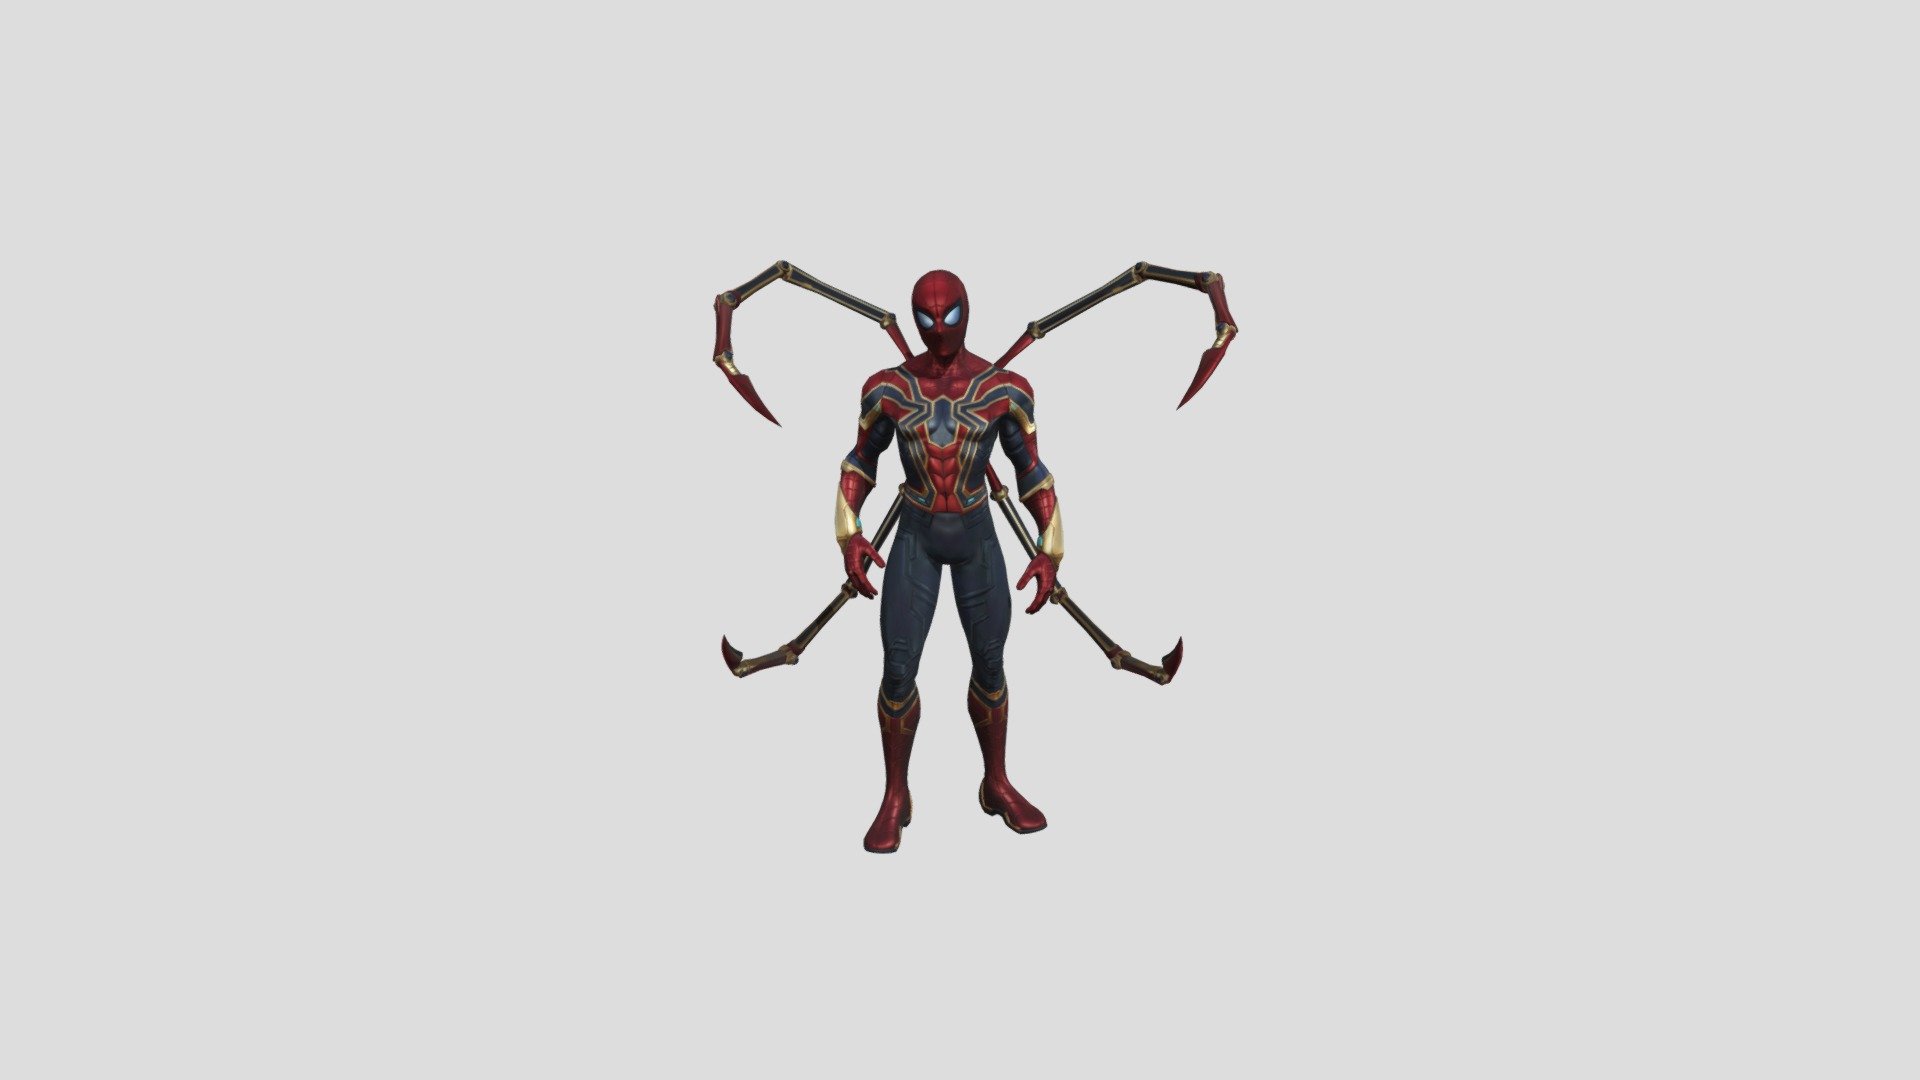 The Iron Spider Armor, listed as Item 17A of the Avengers Compound, is an armored version of the Spider-Man Suit comprised of nanotechnology. It was created by Tony Stark for Peter Parker to use as an Avenger, offered to him in 2016 after he prevented Vulture from stealing from a Stark Cargo Plane. After initially rejecting the suit, Spider-Man was given the suit two years later during the Infinity War, using it to survive in space and fight Thanos on Titan. The suit, along with Spider-Man, was turned to dust during the Snap, although it was restored when Parker was resurrected by Hulk in 2023 and was used to fight the Outriders during the Battle of Earth. 
In 2024, Spider-Man used the armor to subdue members of the Manfredi Crime Family. Months later, he used it to fight Doctor Octopus, who used his tentacles to remove a chunk of the armor and transfer its nanites onto his tentacles. After repairing Doctor Octopus' - Iron Spiderman - 3D model by RockStudio 3d model